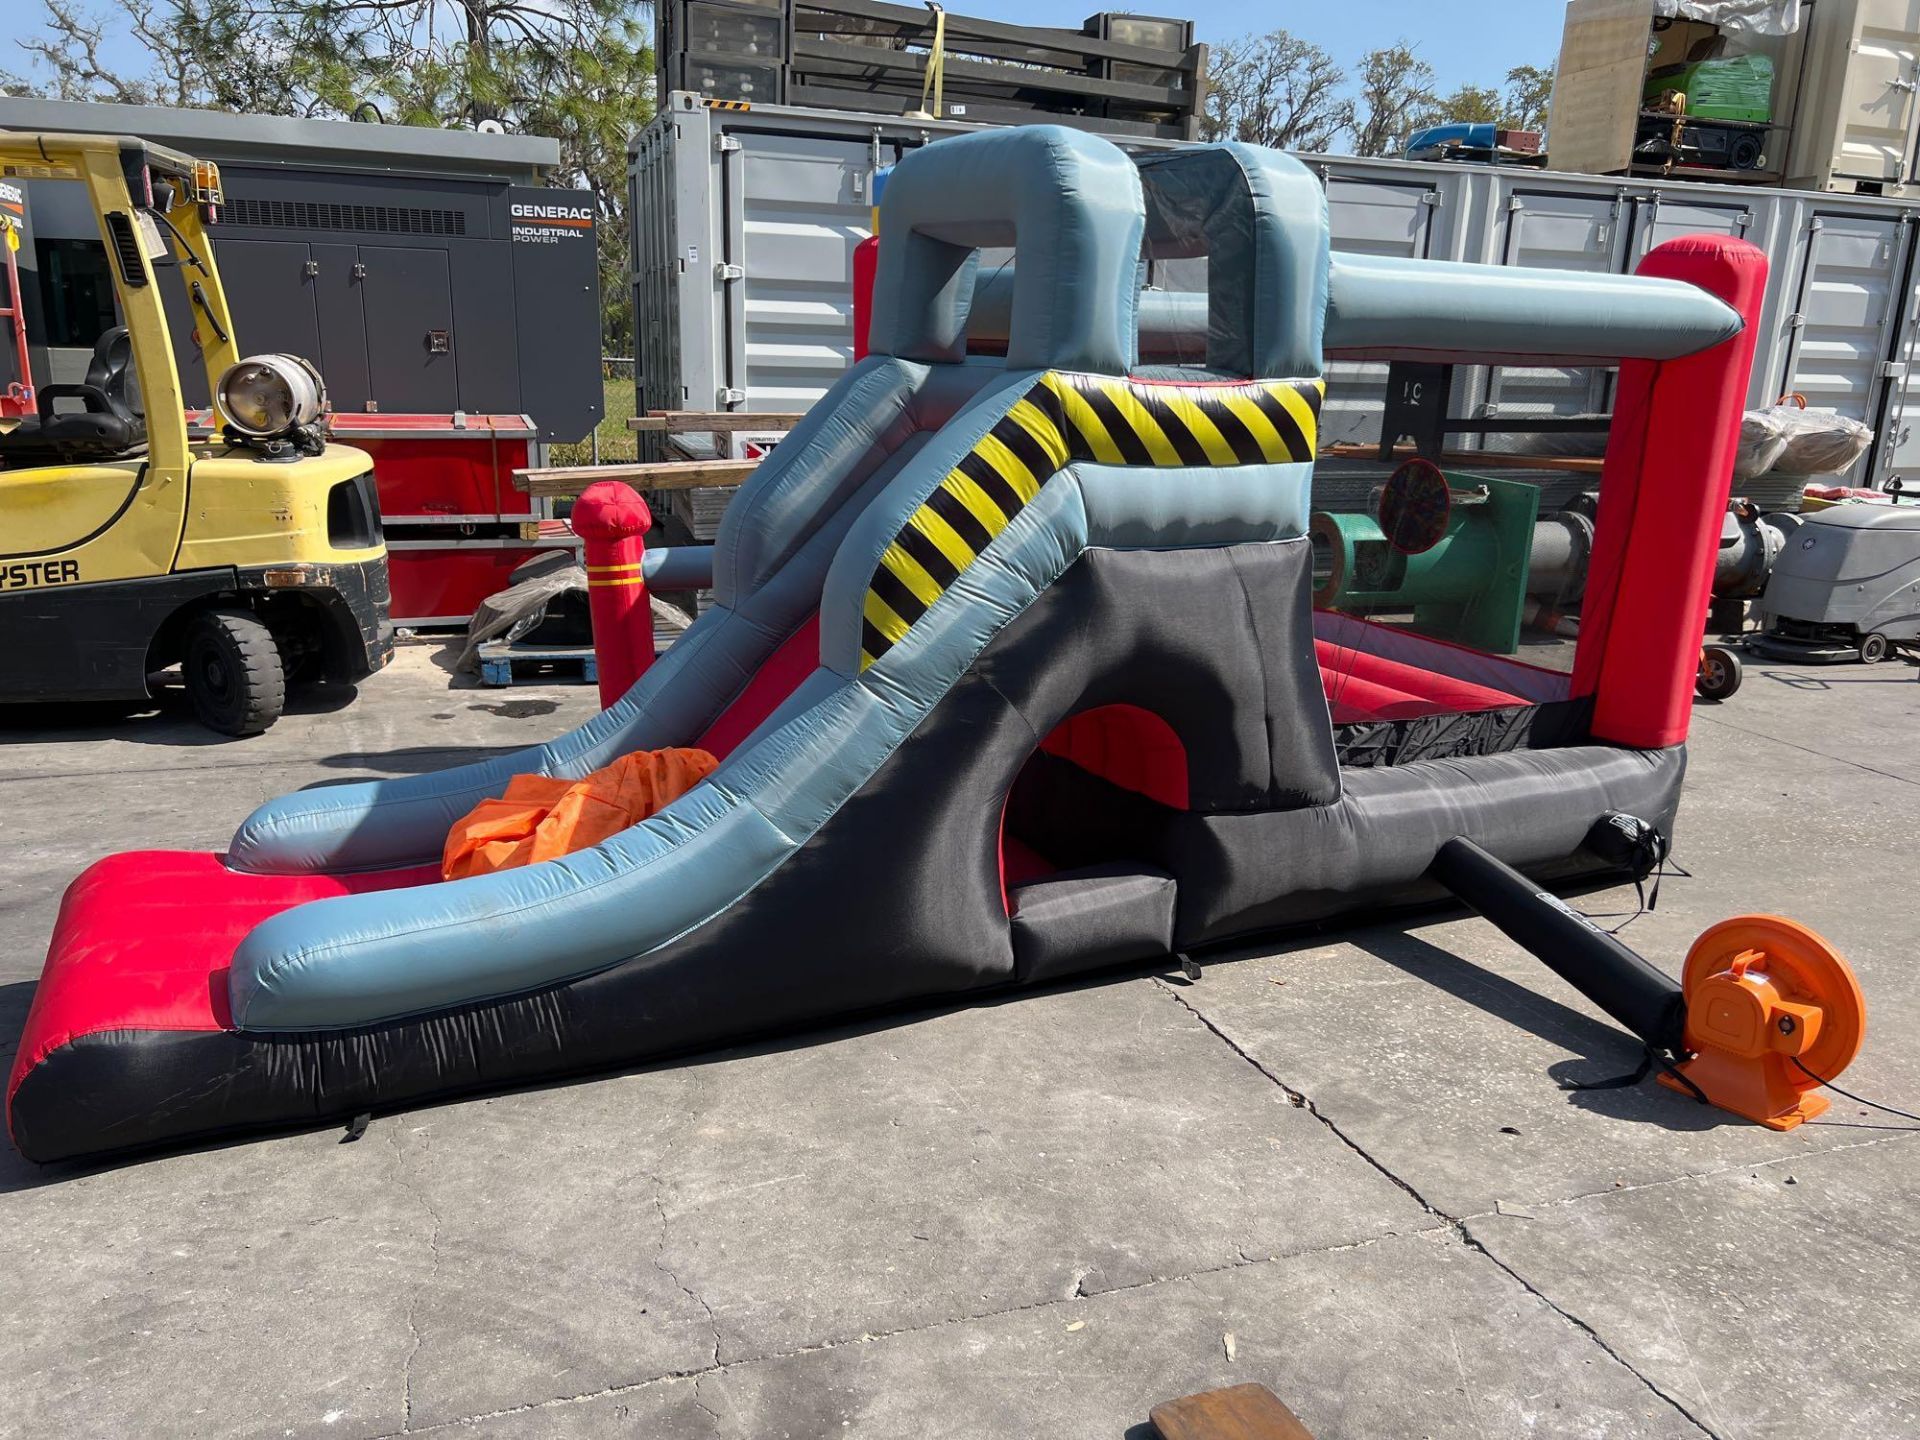 UNUSED BLOW-UP BOUNCY FIRE STATION PLAY YARD WITH SLIDE, VELCRO DARTS, BALLS, STAKES, & BLOWER - Image 3 of 12